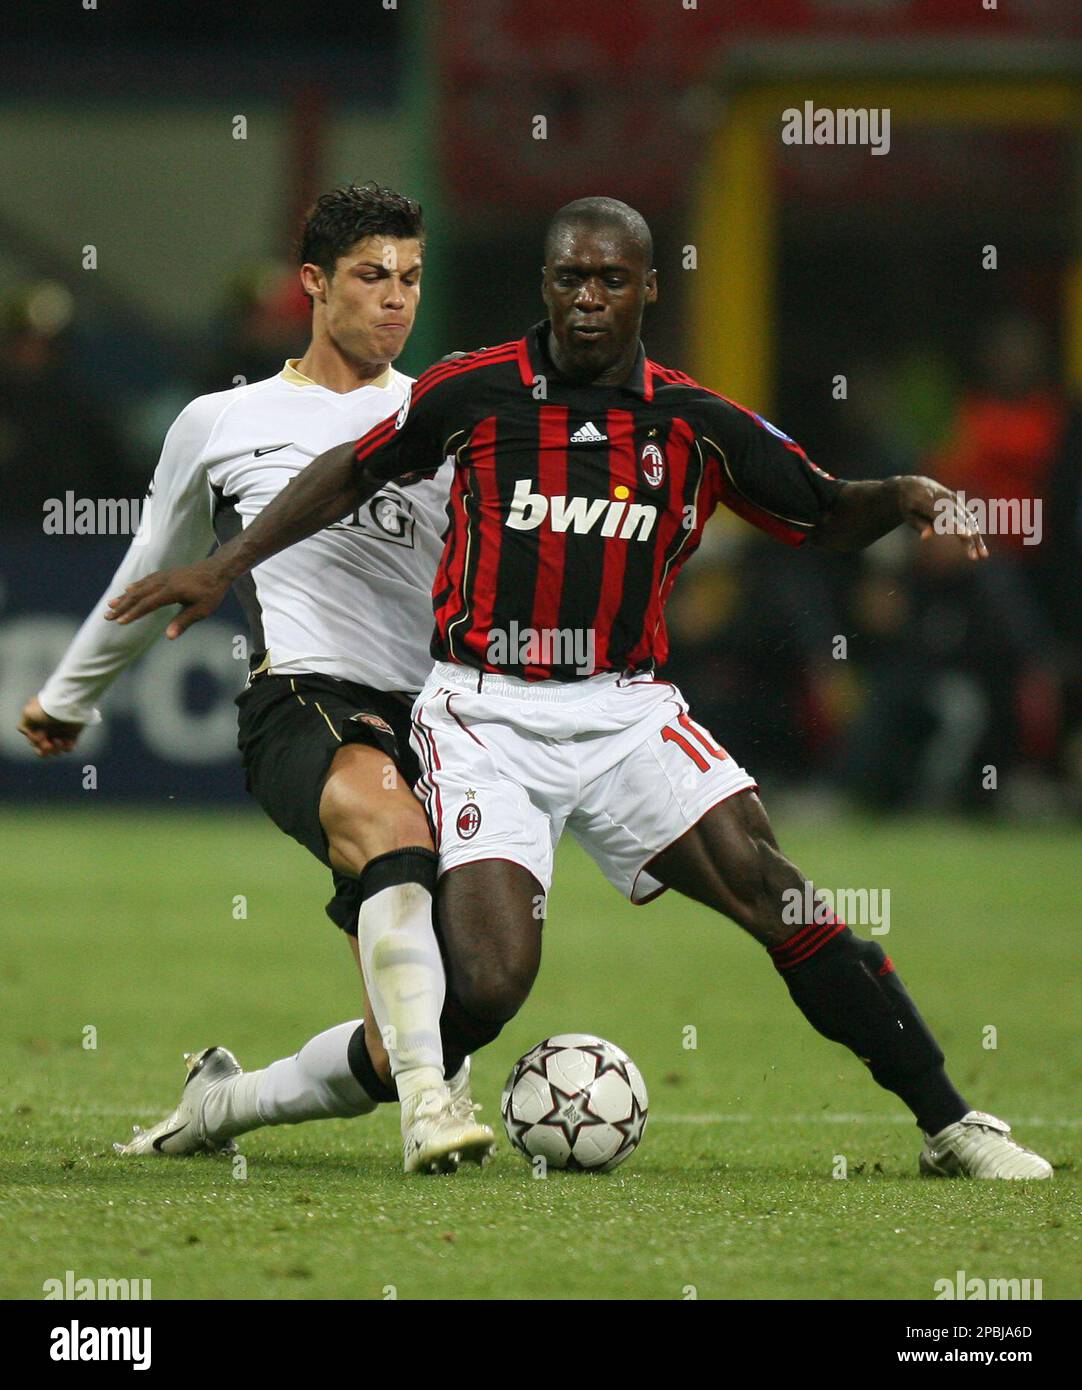 Milan's Clarence Seedorf, right, is tackled by Manchester United's  Cristiano Ronaldo earning the latter a yellow card in the process during  their Champions League semifinal second leg soccer match at the San